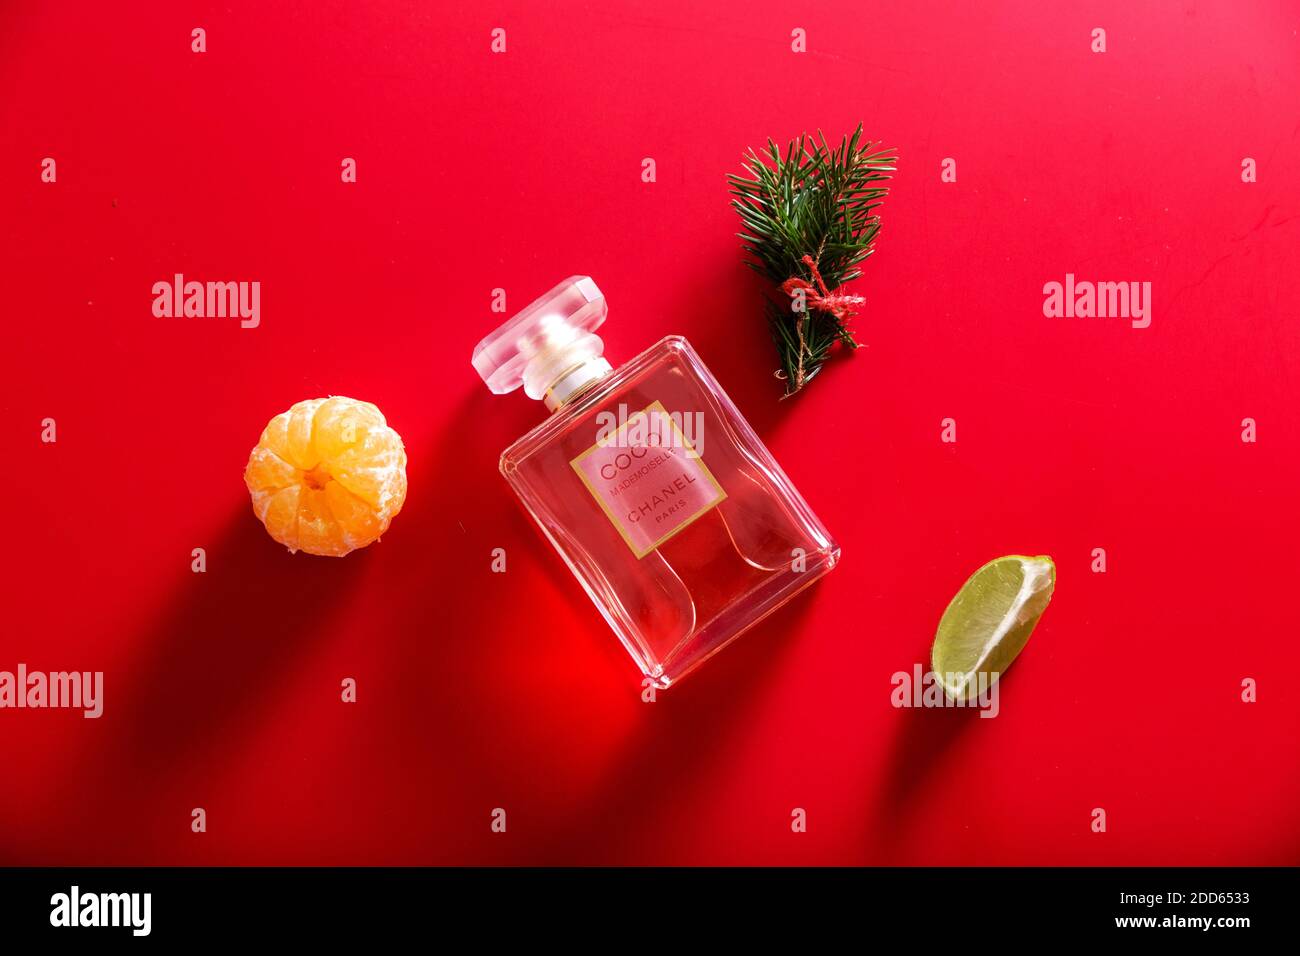 A bottle of perfume among the decor of Christmas tree branches, tangerine and lime on a red background Stock Photo